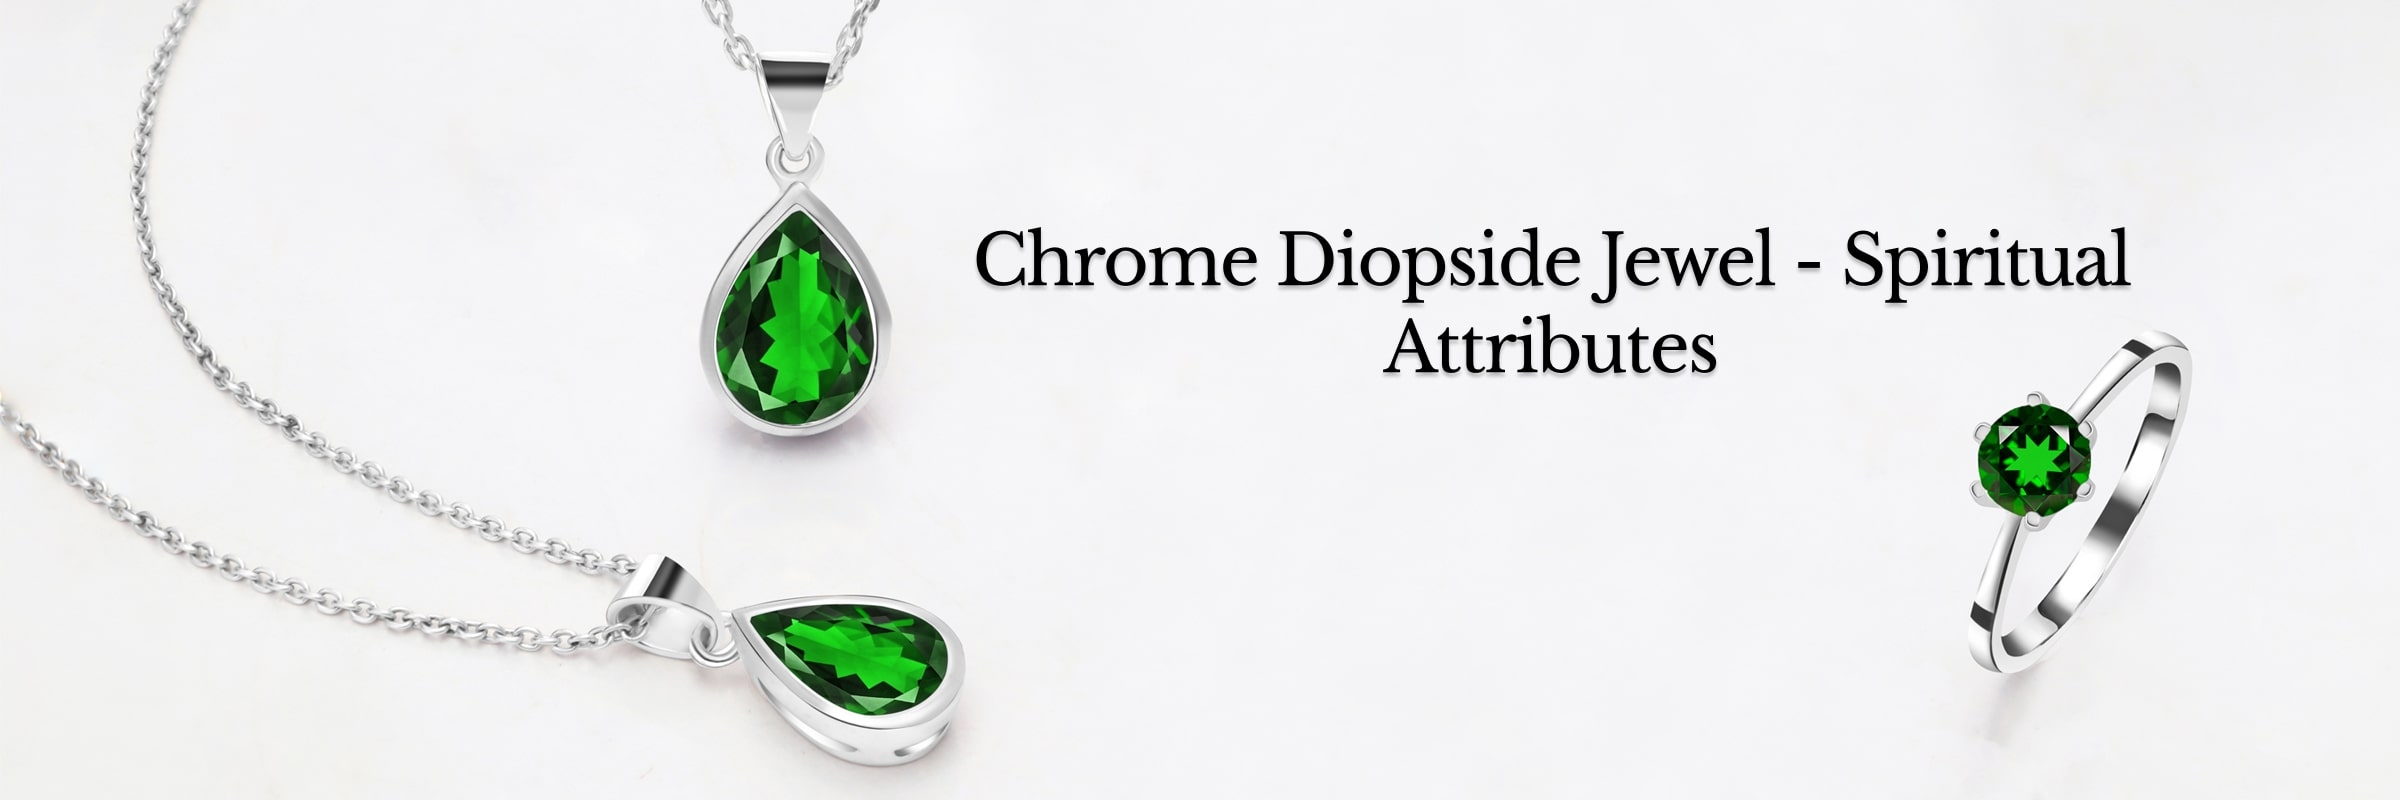 Metaphysical Properties of Chrome Diopside Jewel